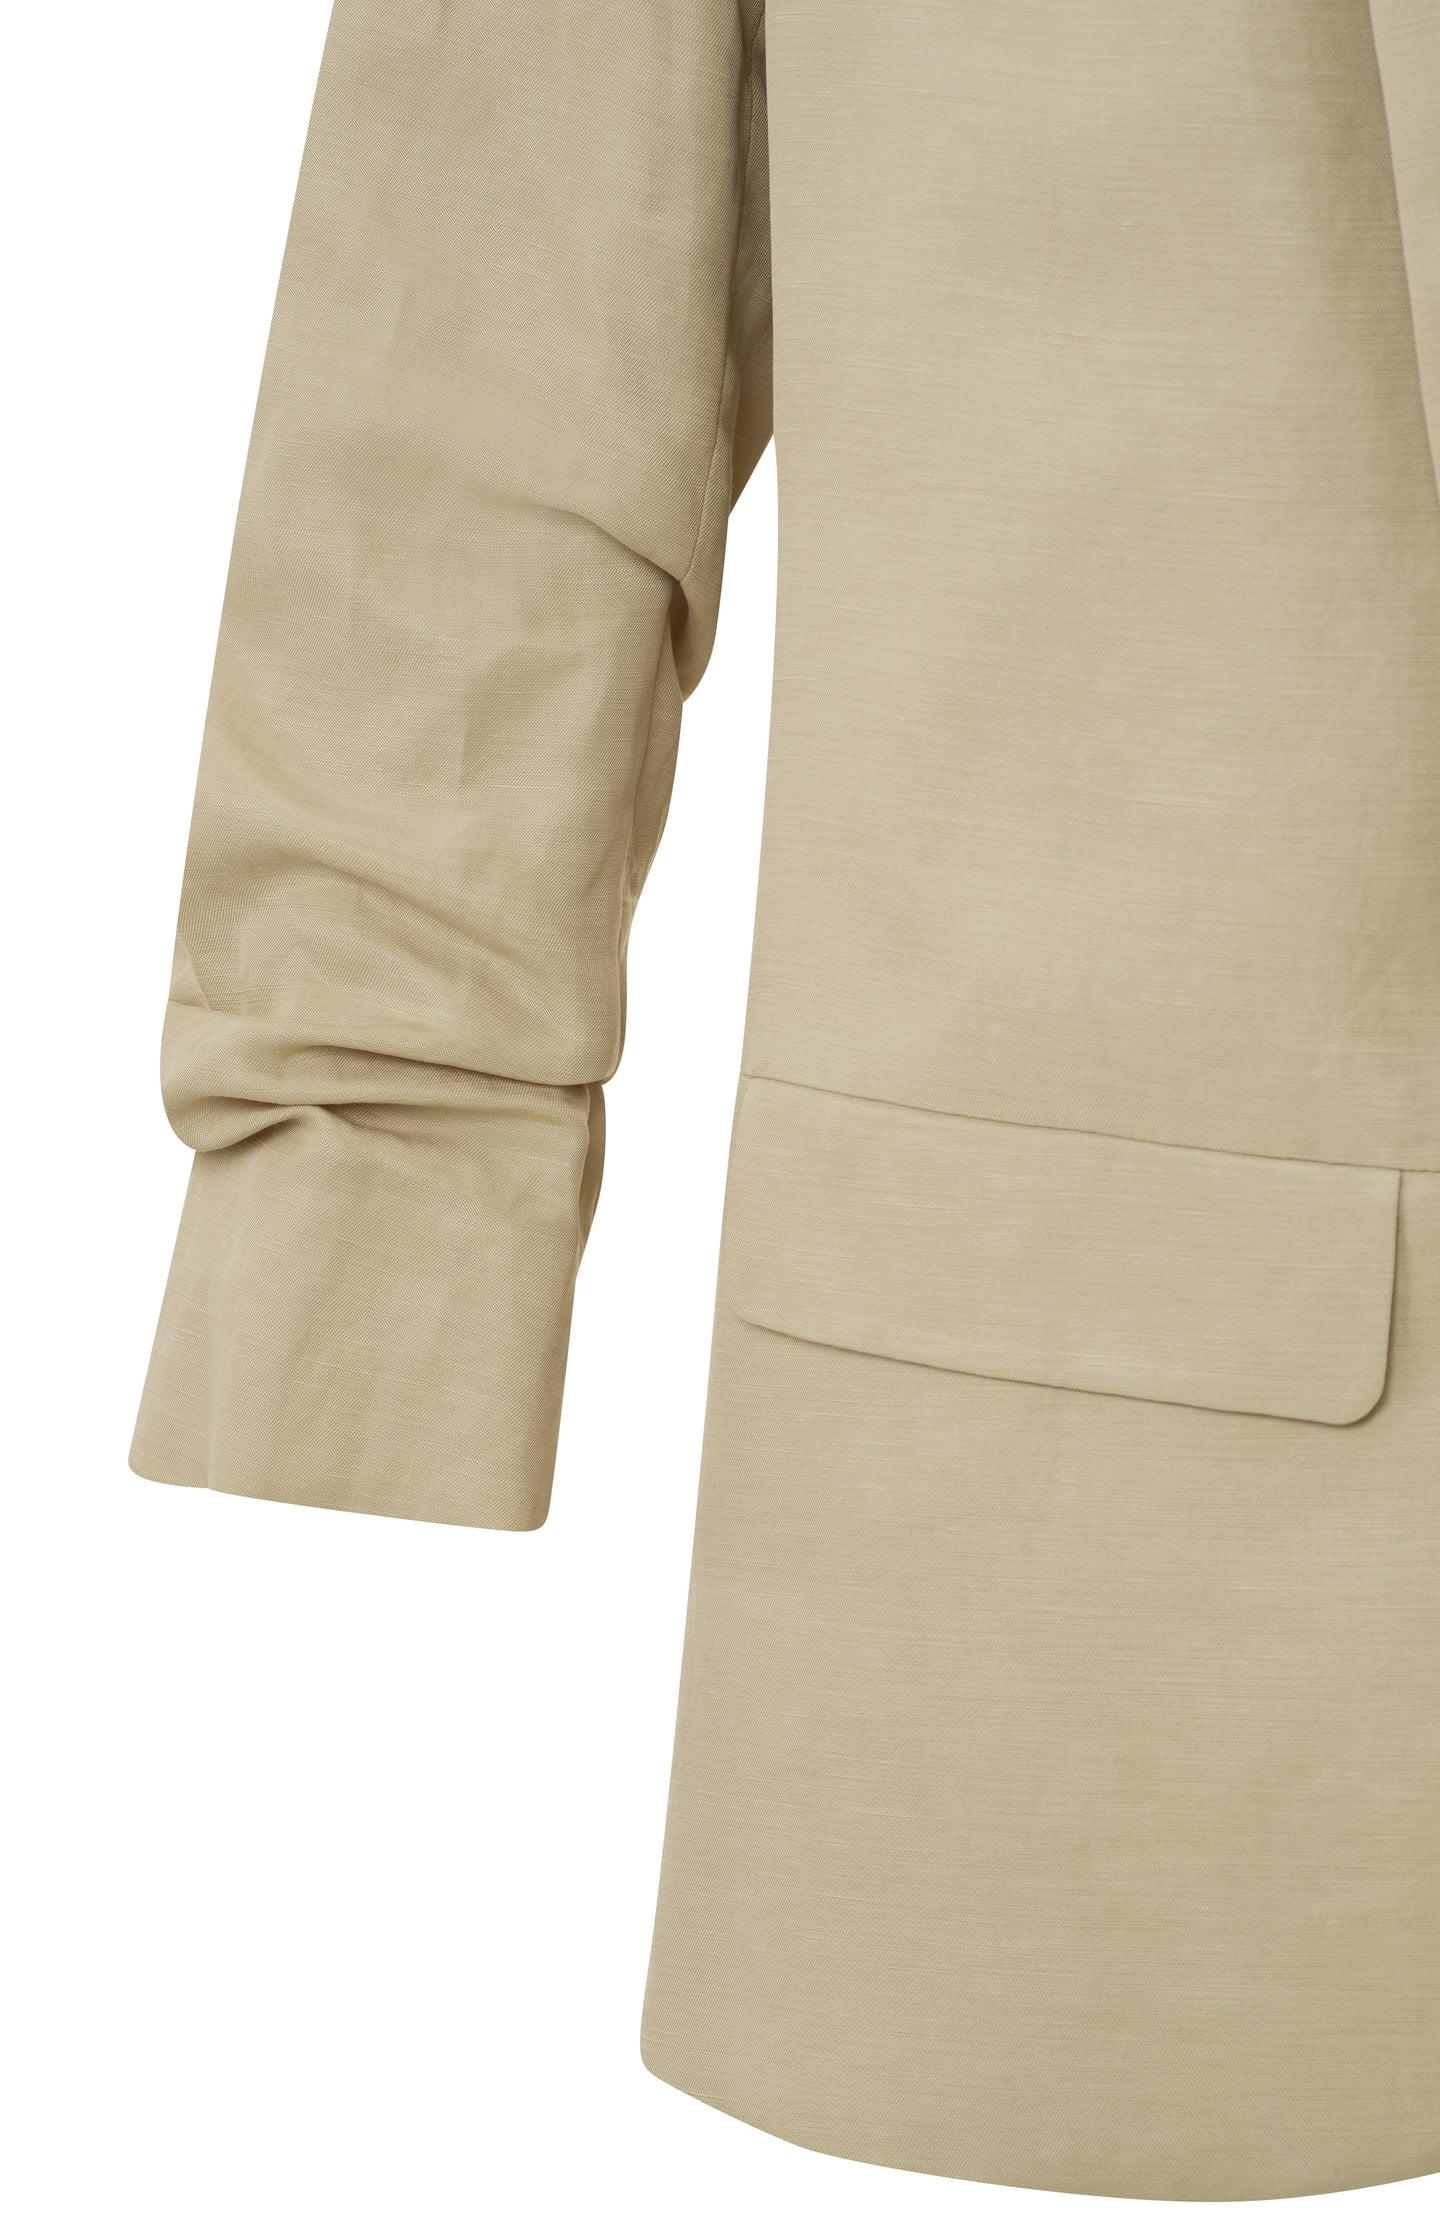 Woven blazer with long, detailed sleeves and pockets